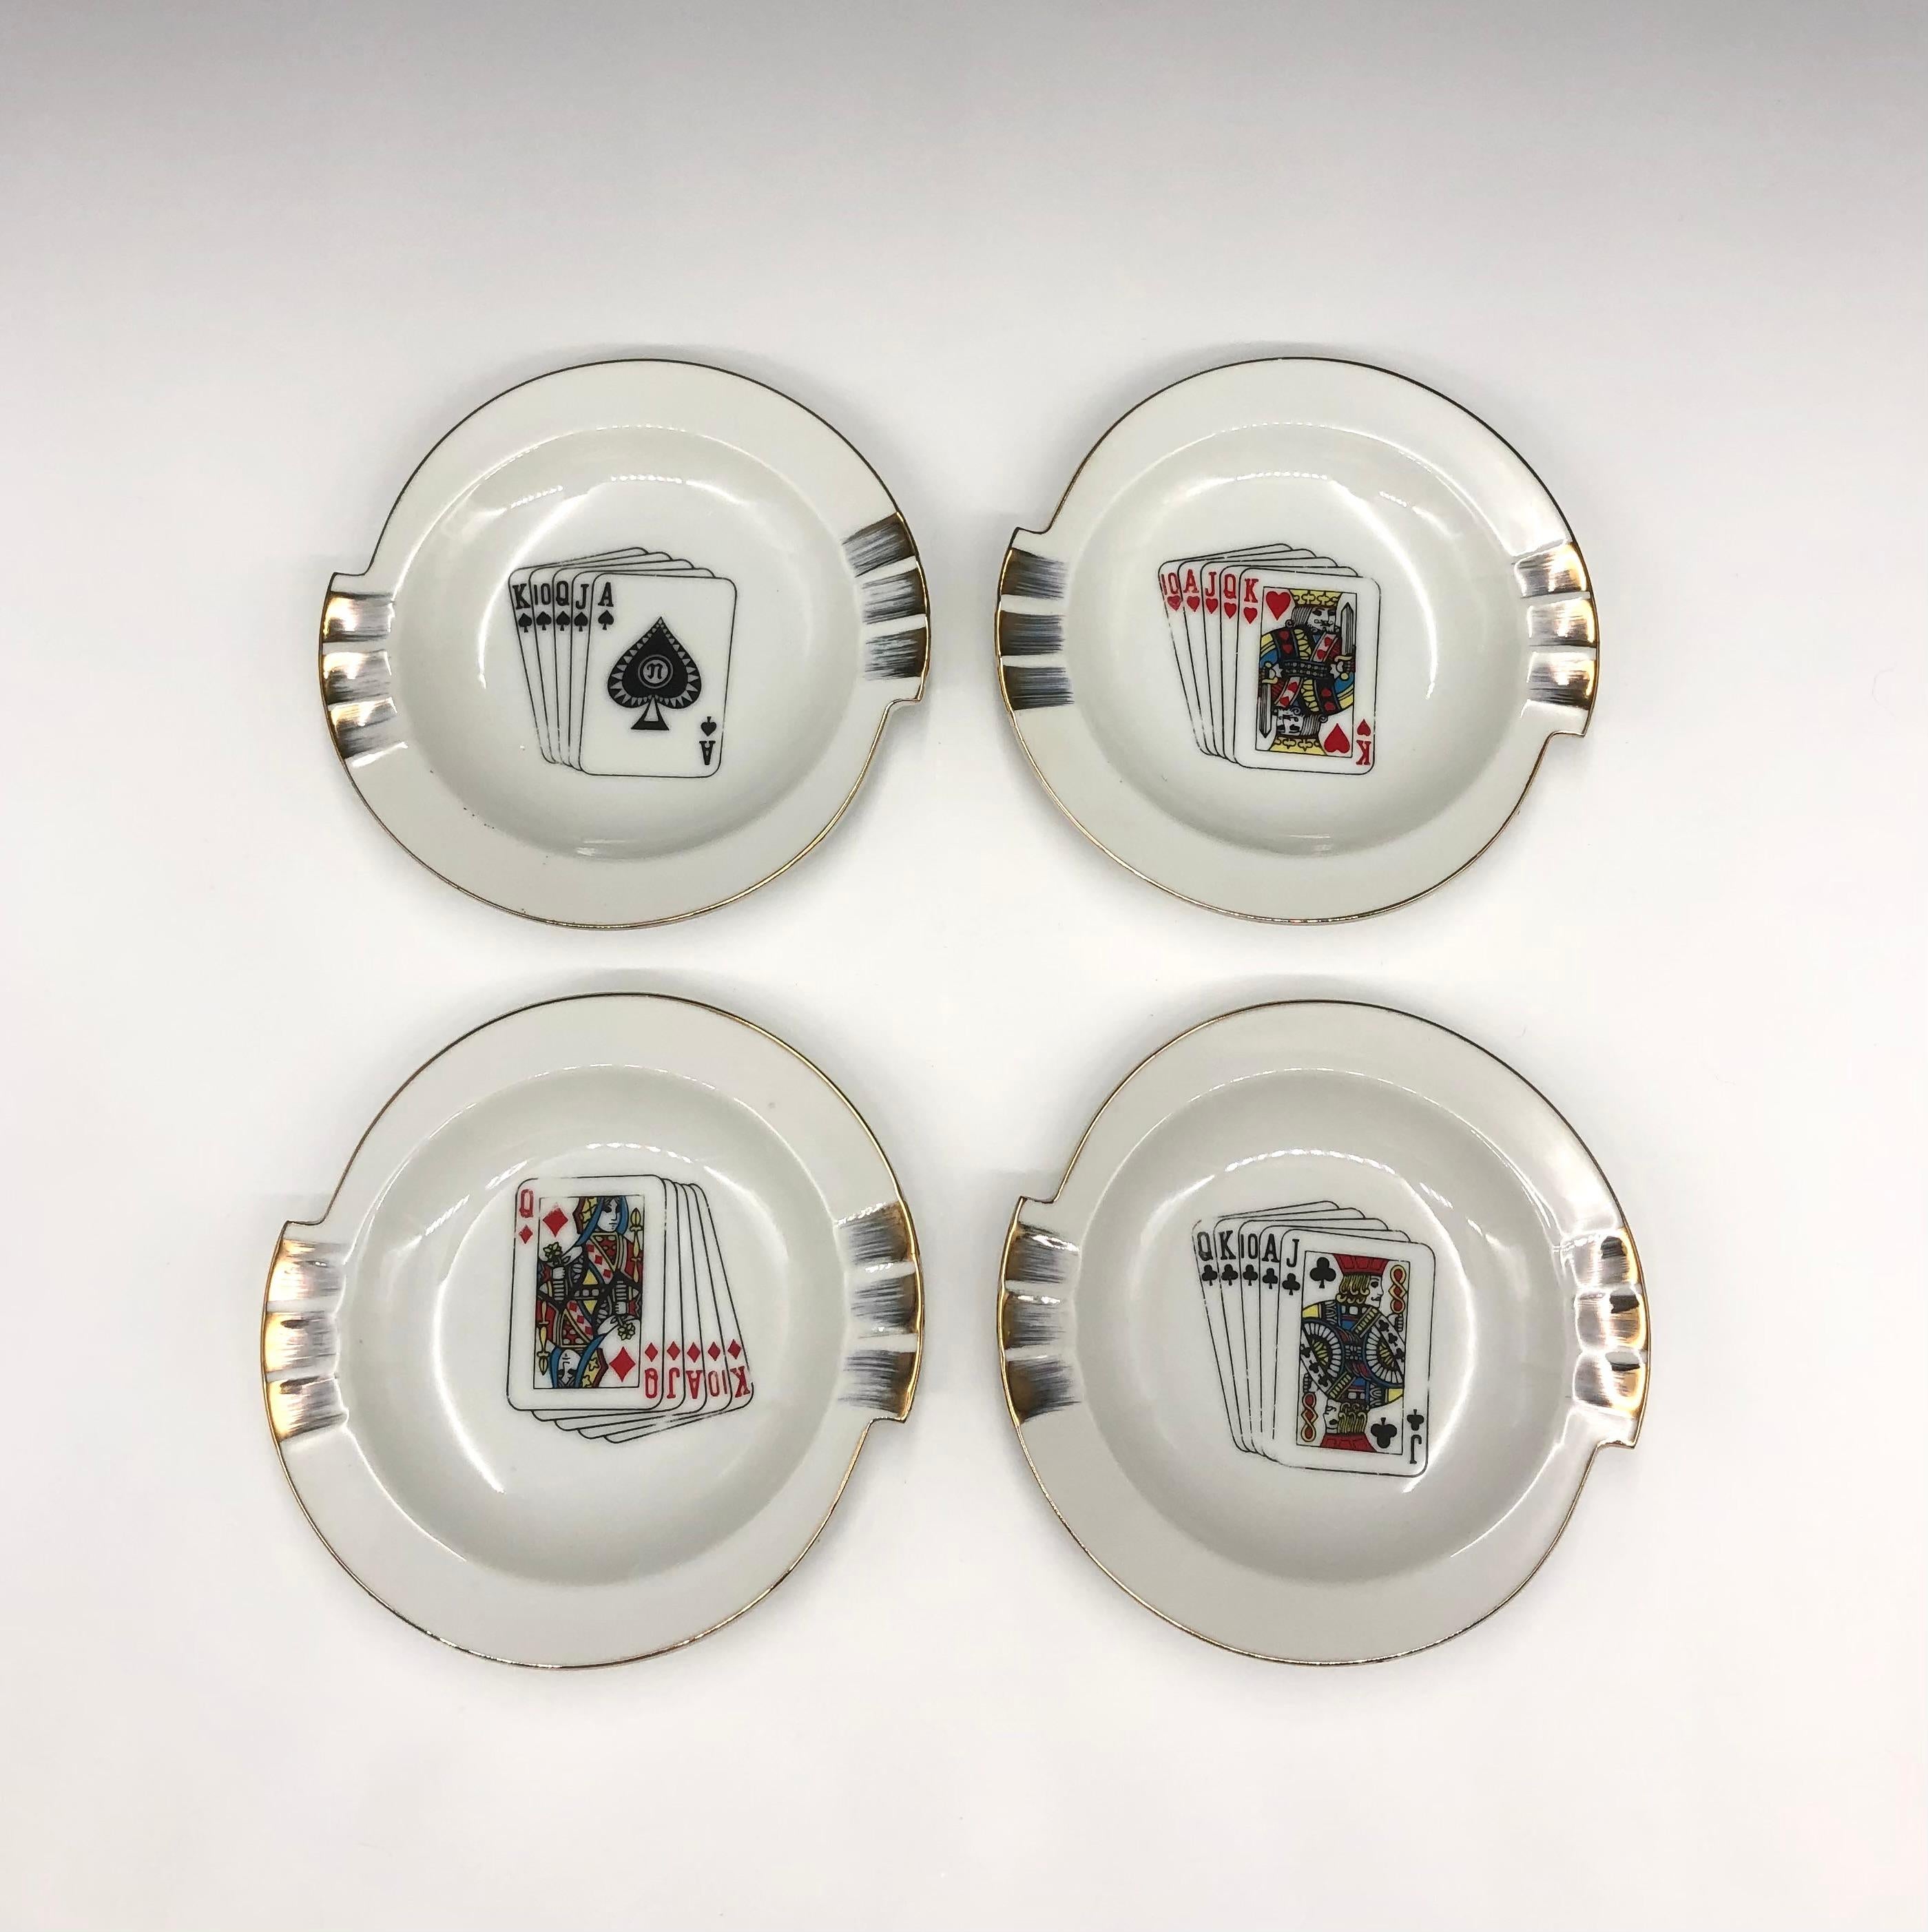 Vintage 1950s Porcelain Playing Card Ashtrays / Plates - Sculpture by Unknown